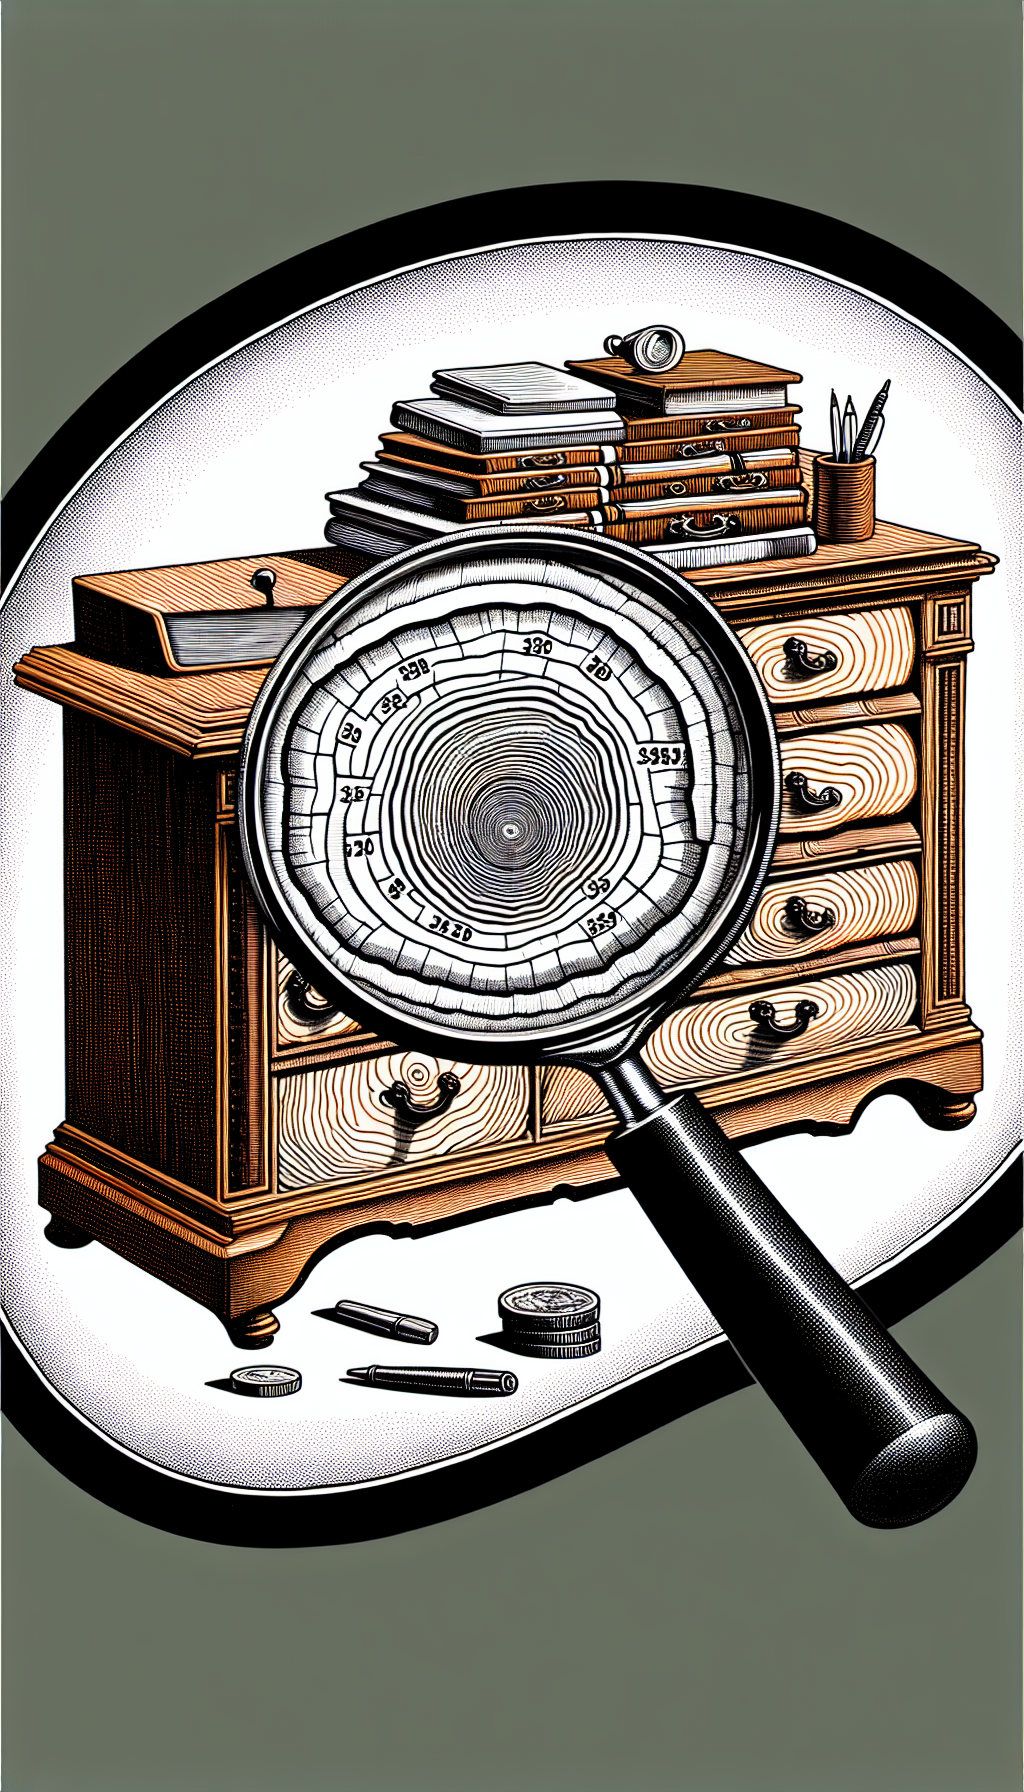 An illustration depicts a magnifying glass over an intricate drop-front secretary desk, with rings of time like a tree's growth rings within the magnified area, progressively revealing older styles from Renaissance, Victorian, to Art Nouveau. Each ring is subtly inscribed with a monetary value, showcasing the rising value of the desk as it traces back to its origins.